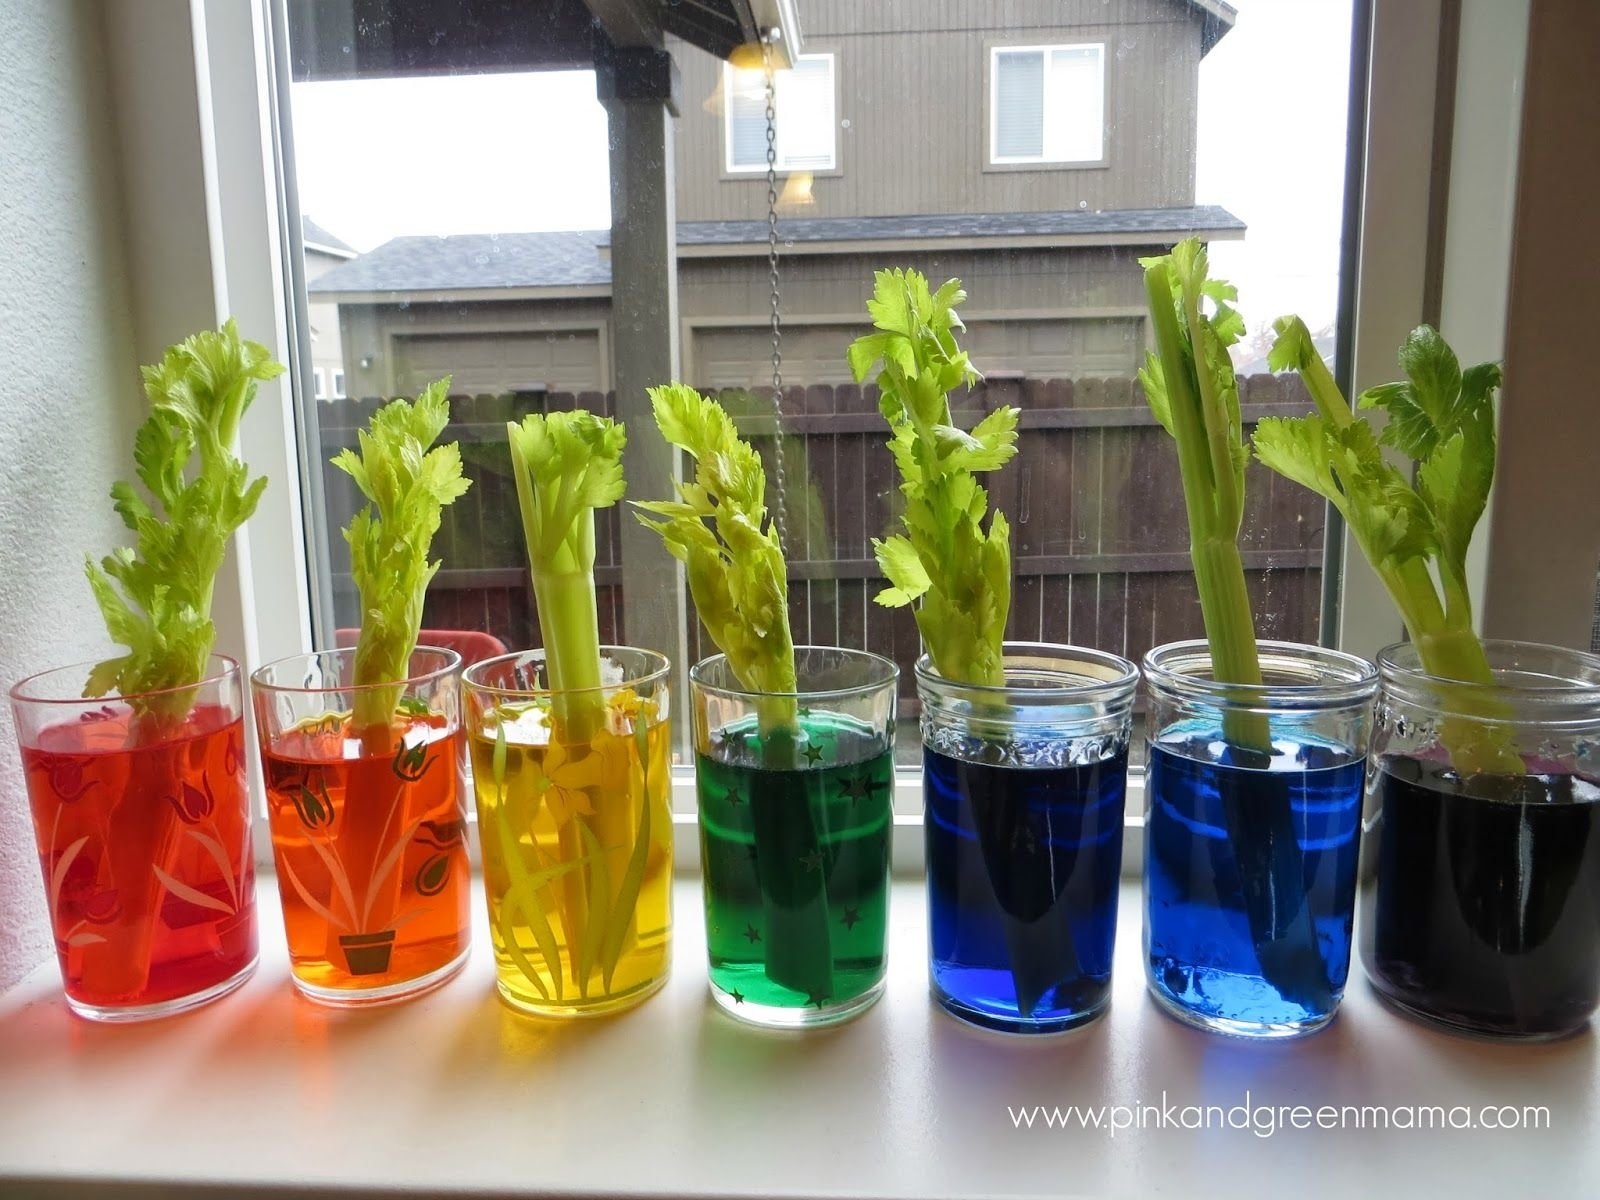 10 Great Science Fair Project Ideas For Kids celery science colored stalk and leaves experiement preschool art 2023